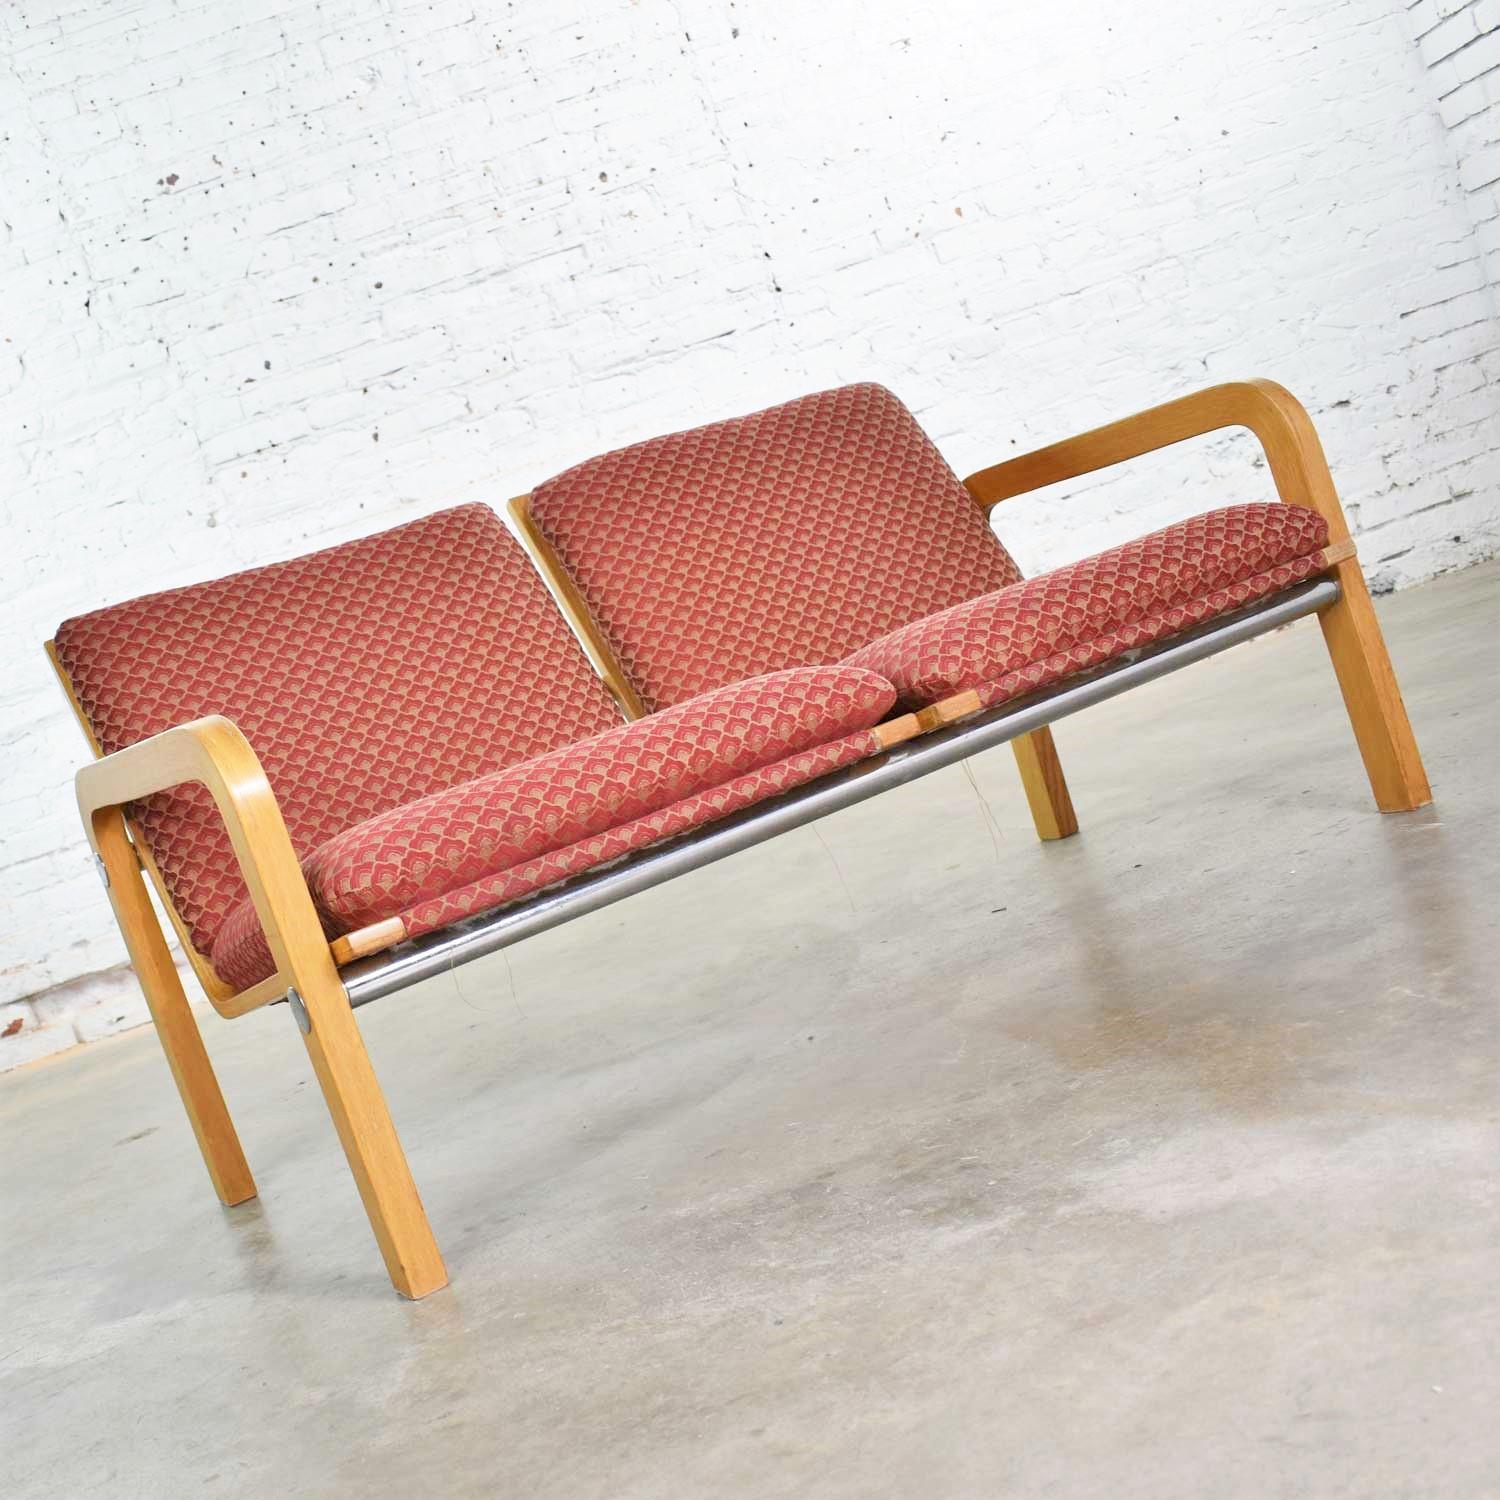 Vintage Modern Oak Bentwood & Chrome Two-Seat Settee or Bench Attr to Thonet  In Good Condition For Sale In Topeka, KS